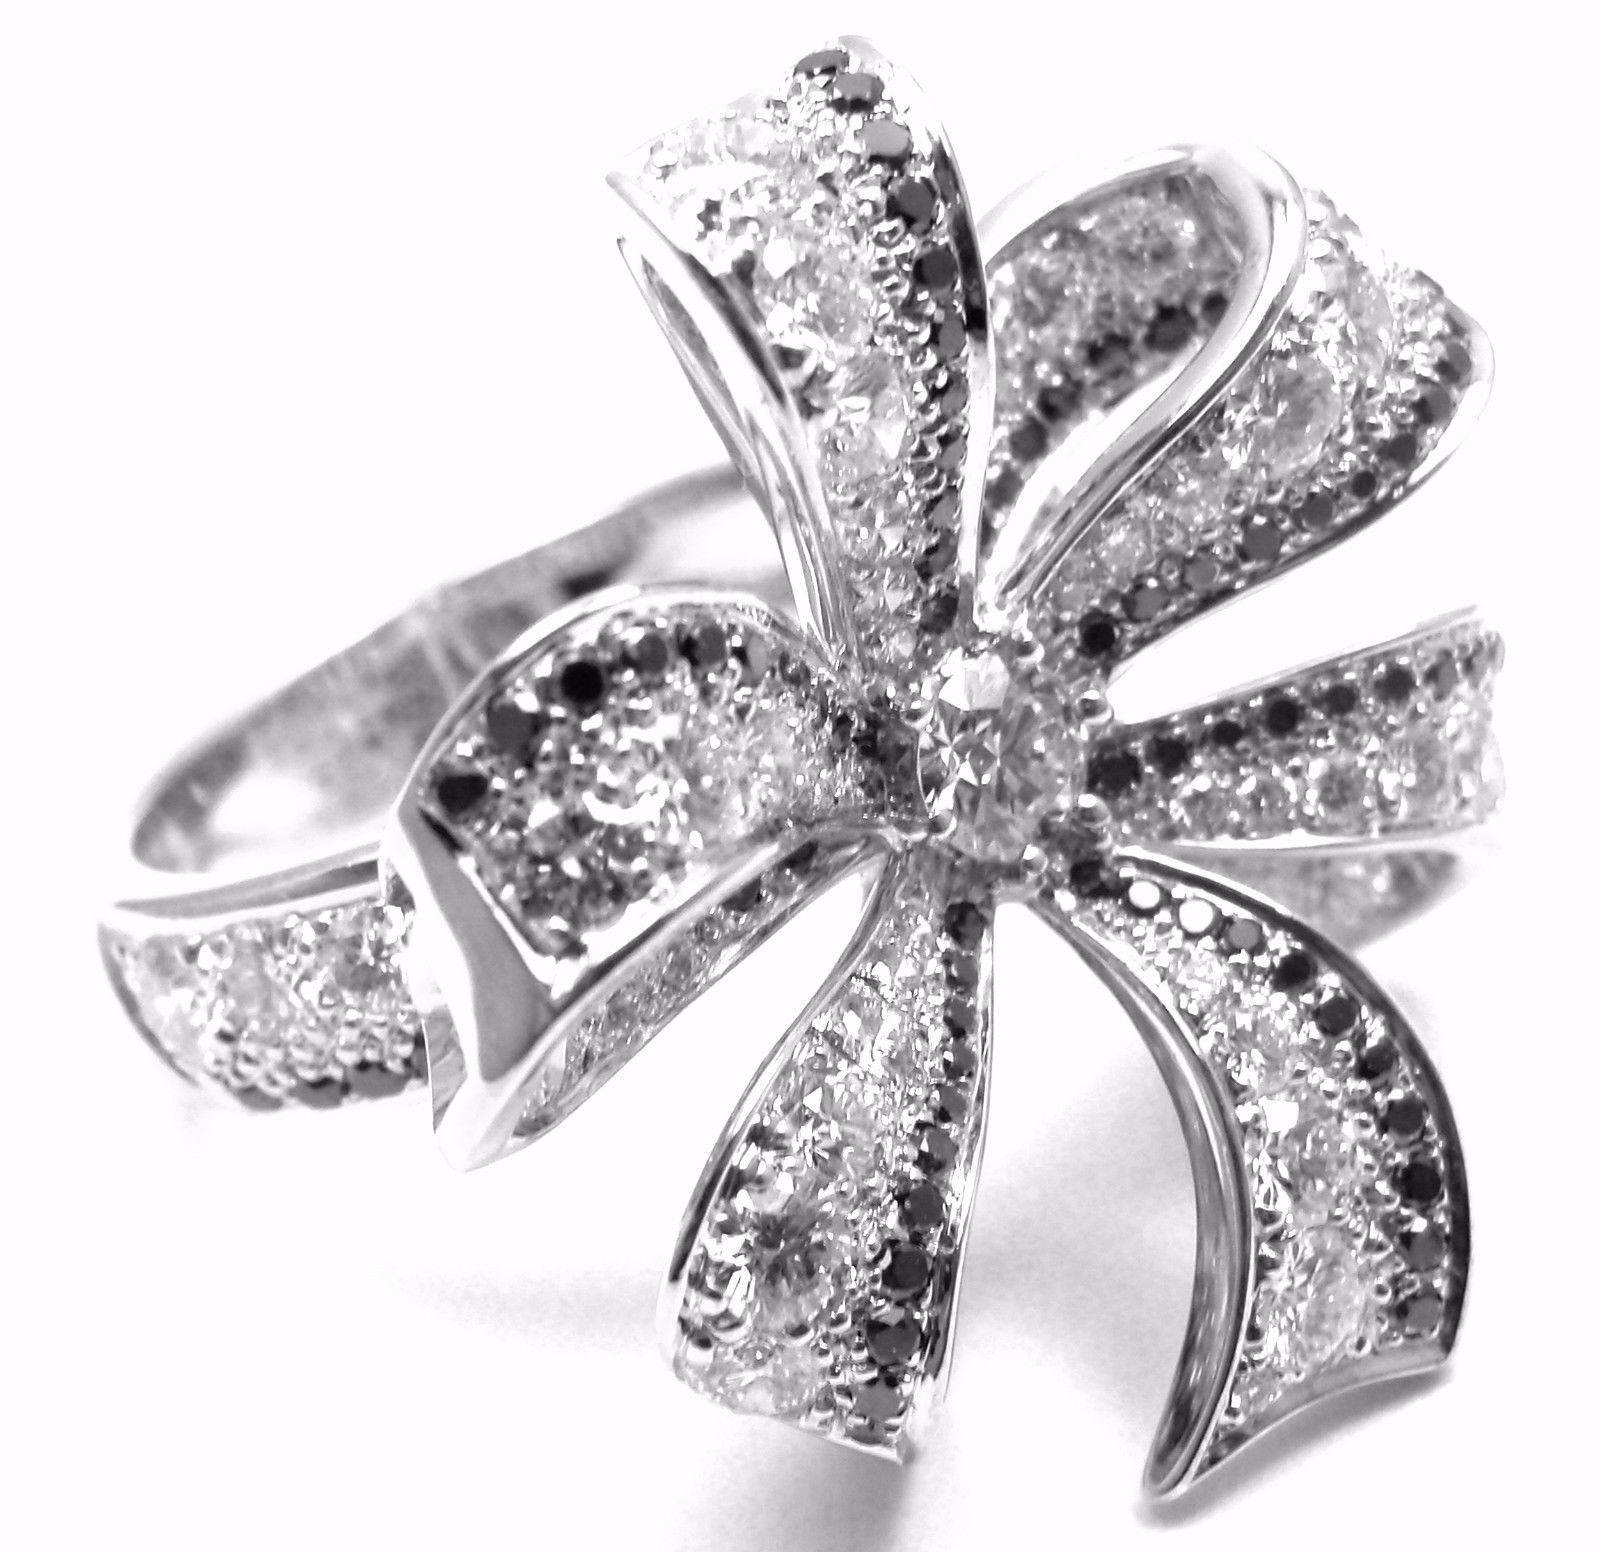 18k White Gold White And Black Diamond 1932 Ring by Chanel.  
Part of Chanel's gorgeous 